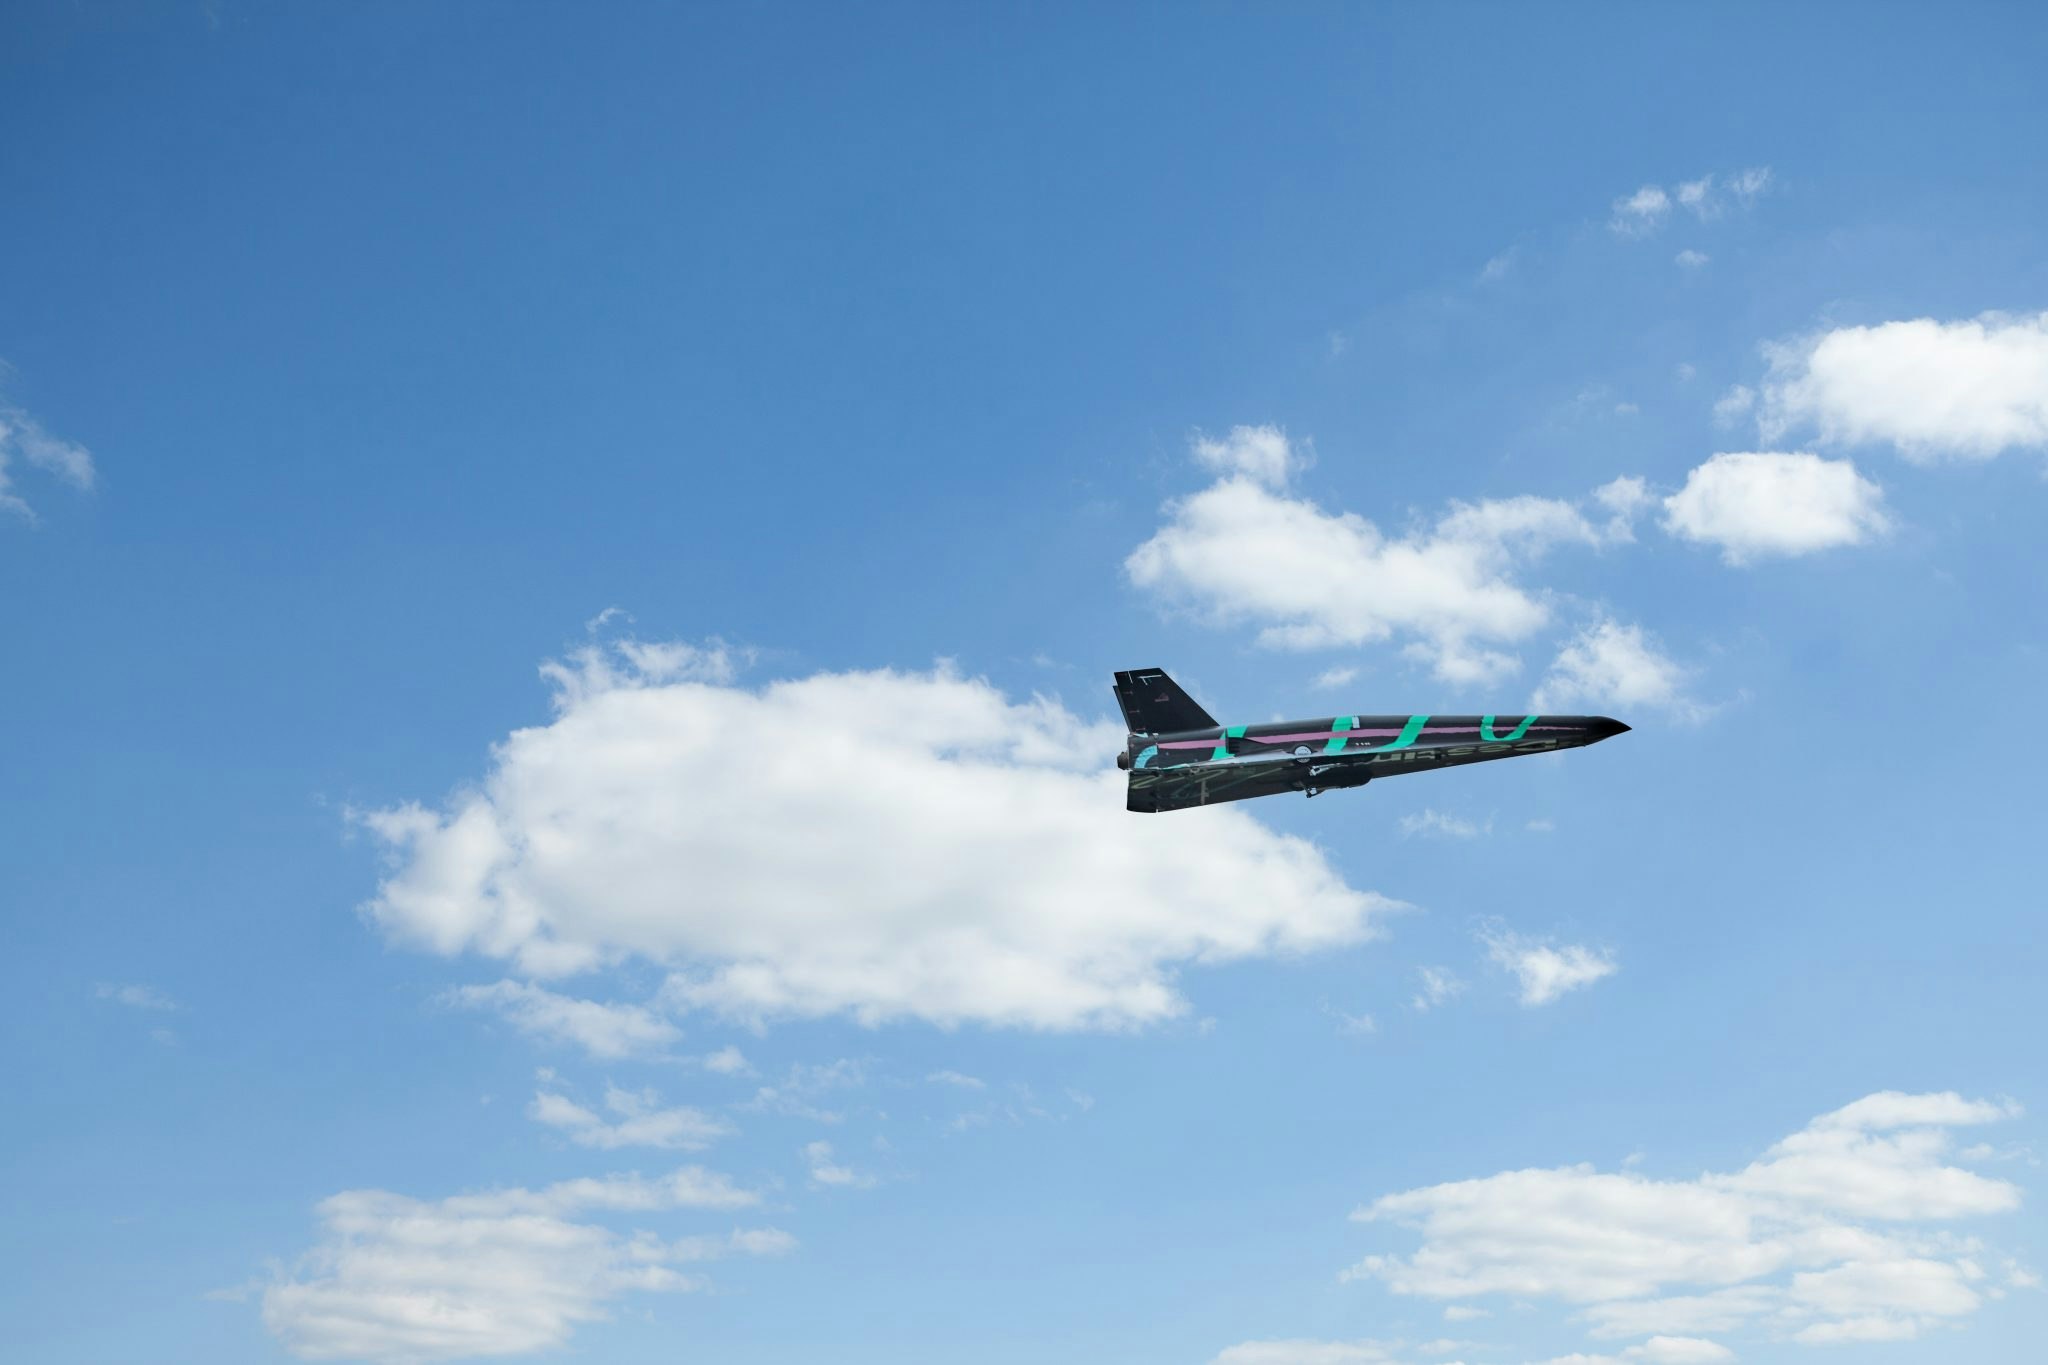 A photograph of Destinus's scaled-down model plane in flight